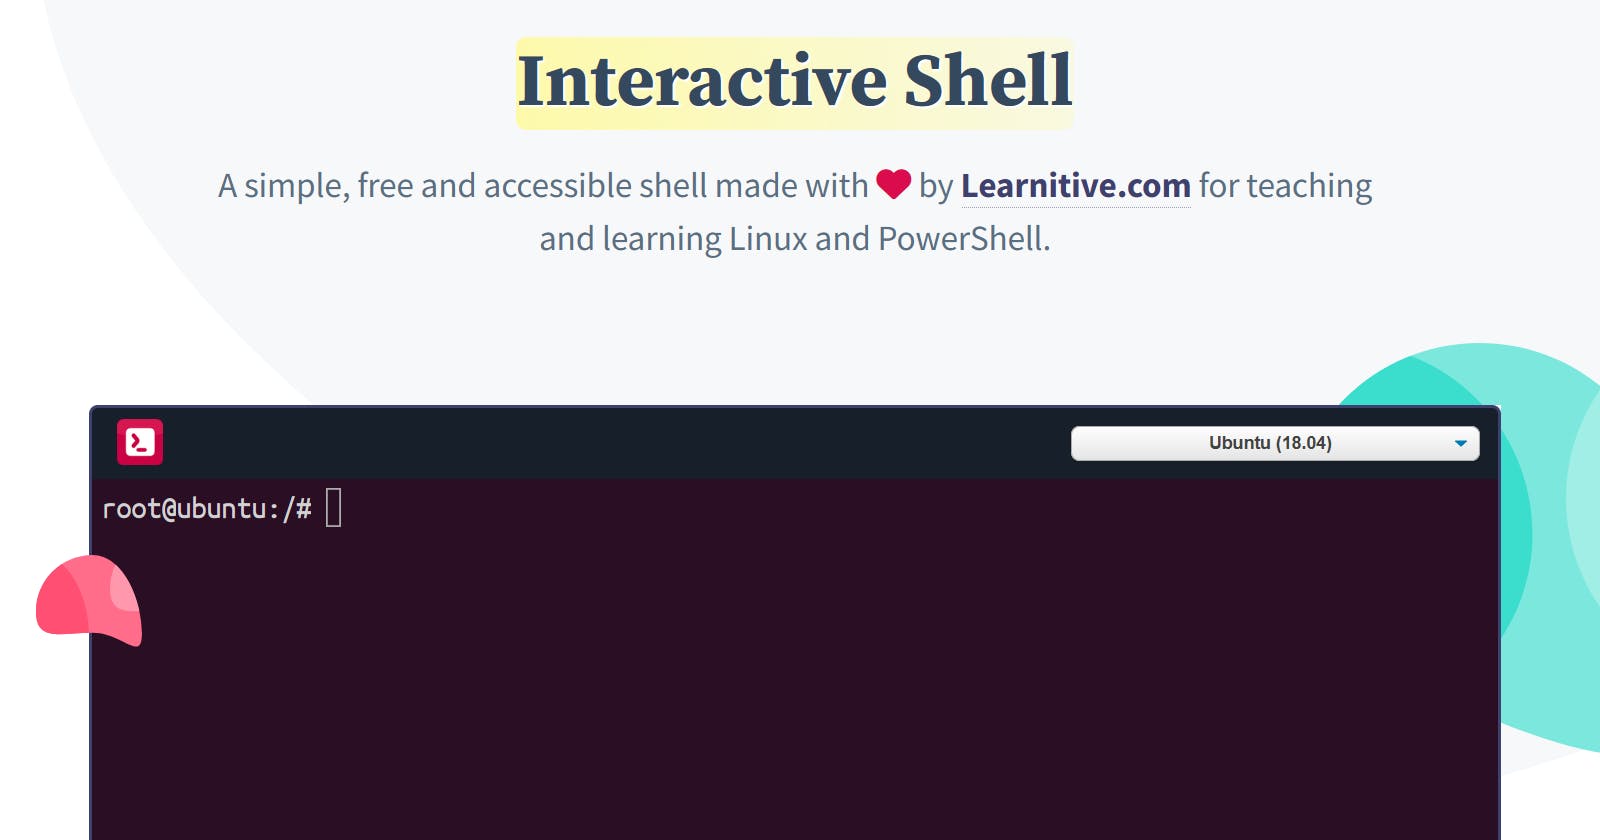 How to Learn Linux with an Interactive Web-based Shell?